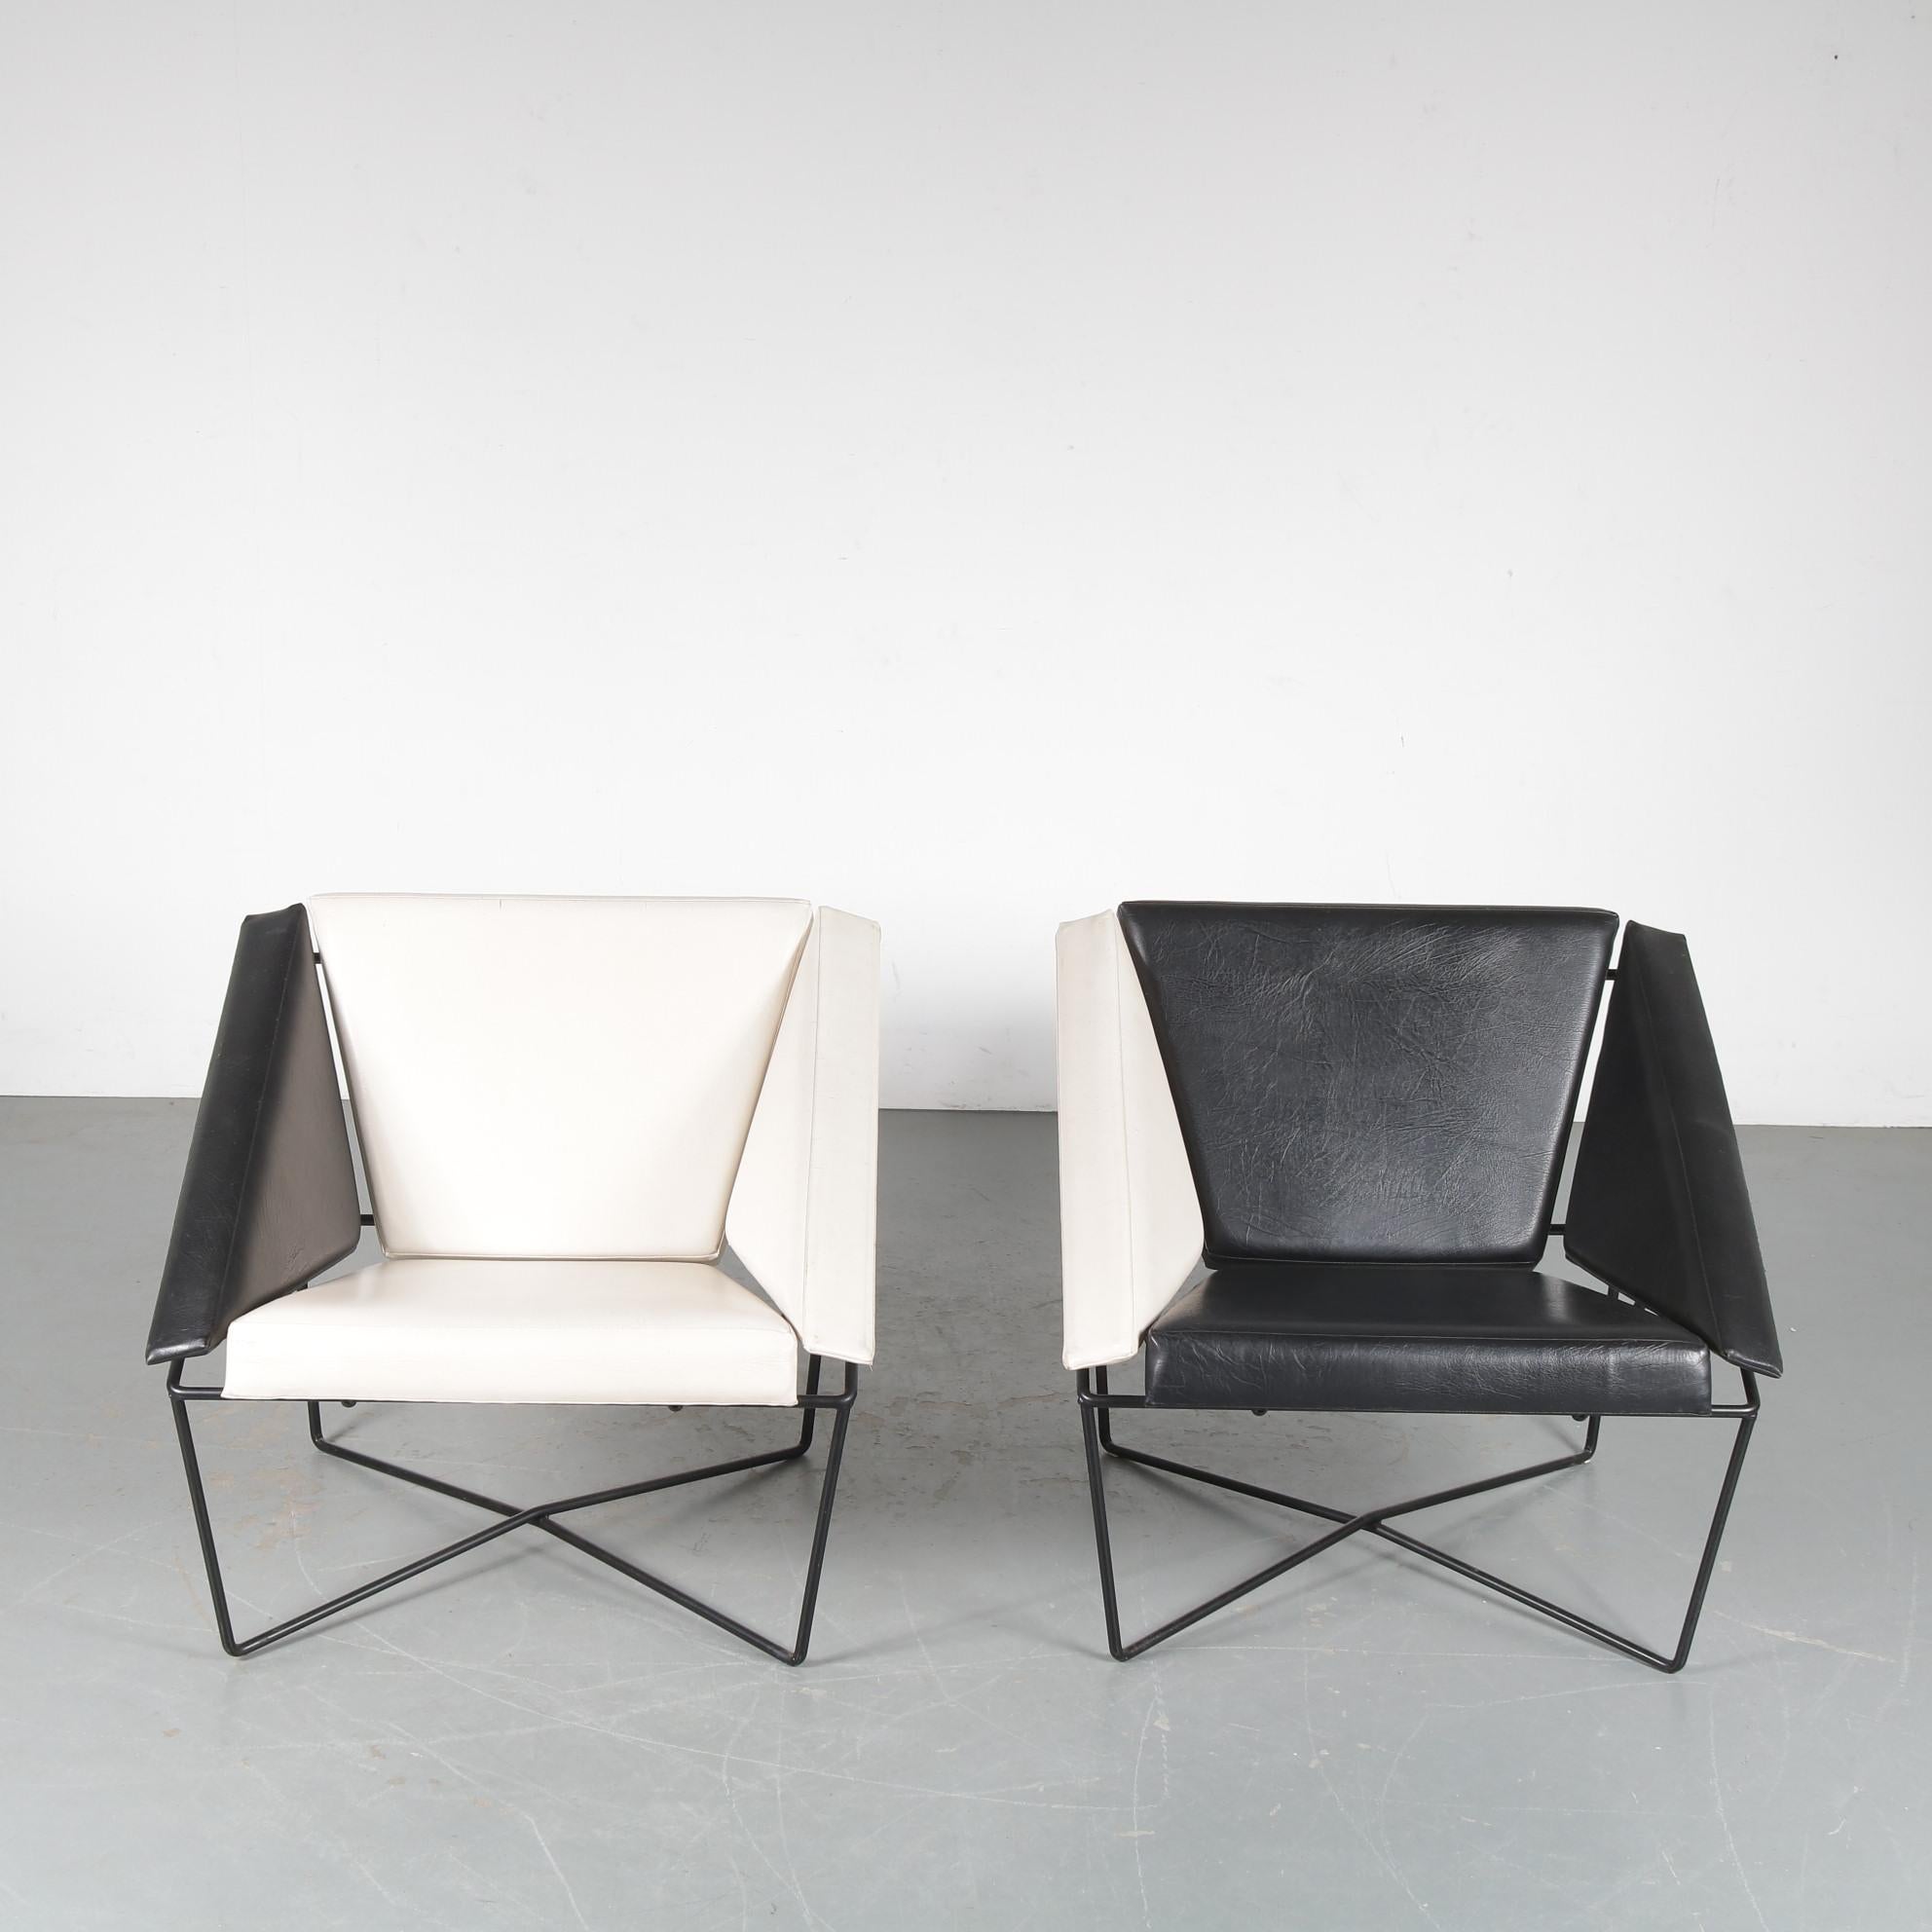 Late 20th Century Rob Eckhardt Pair of “Van Speyk” Chairs for Pastoe, Netherlands, 1984